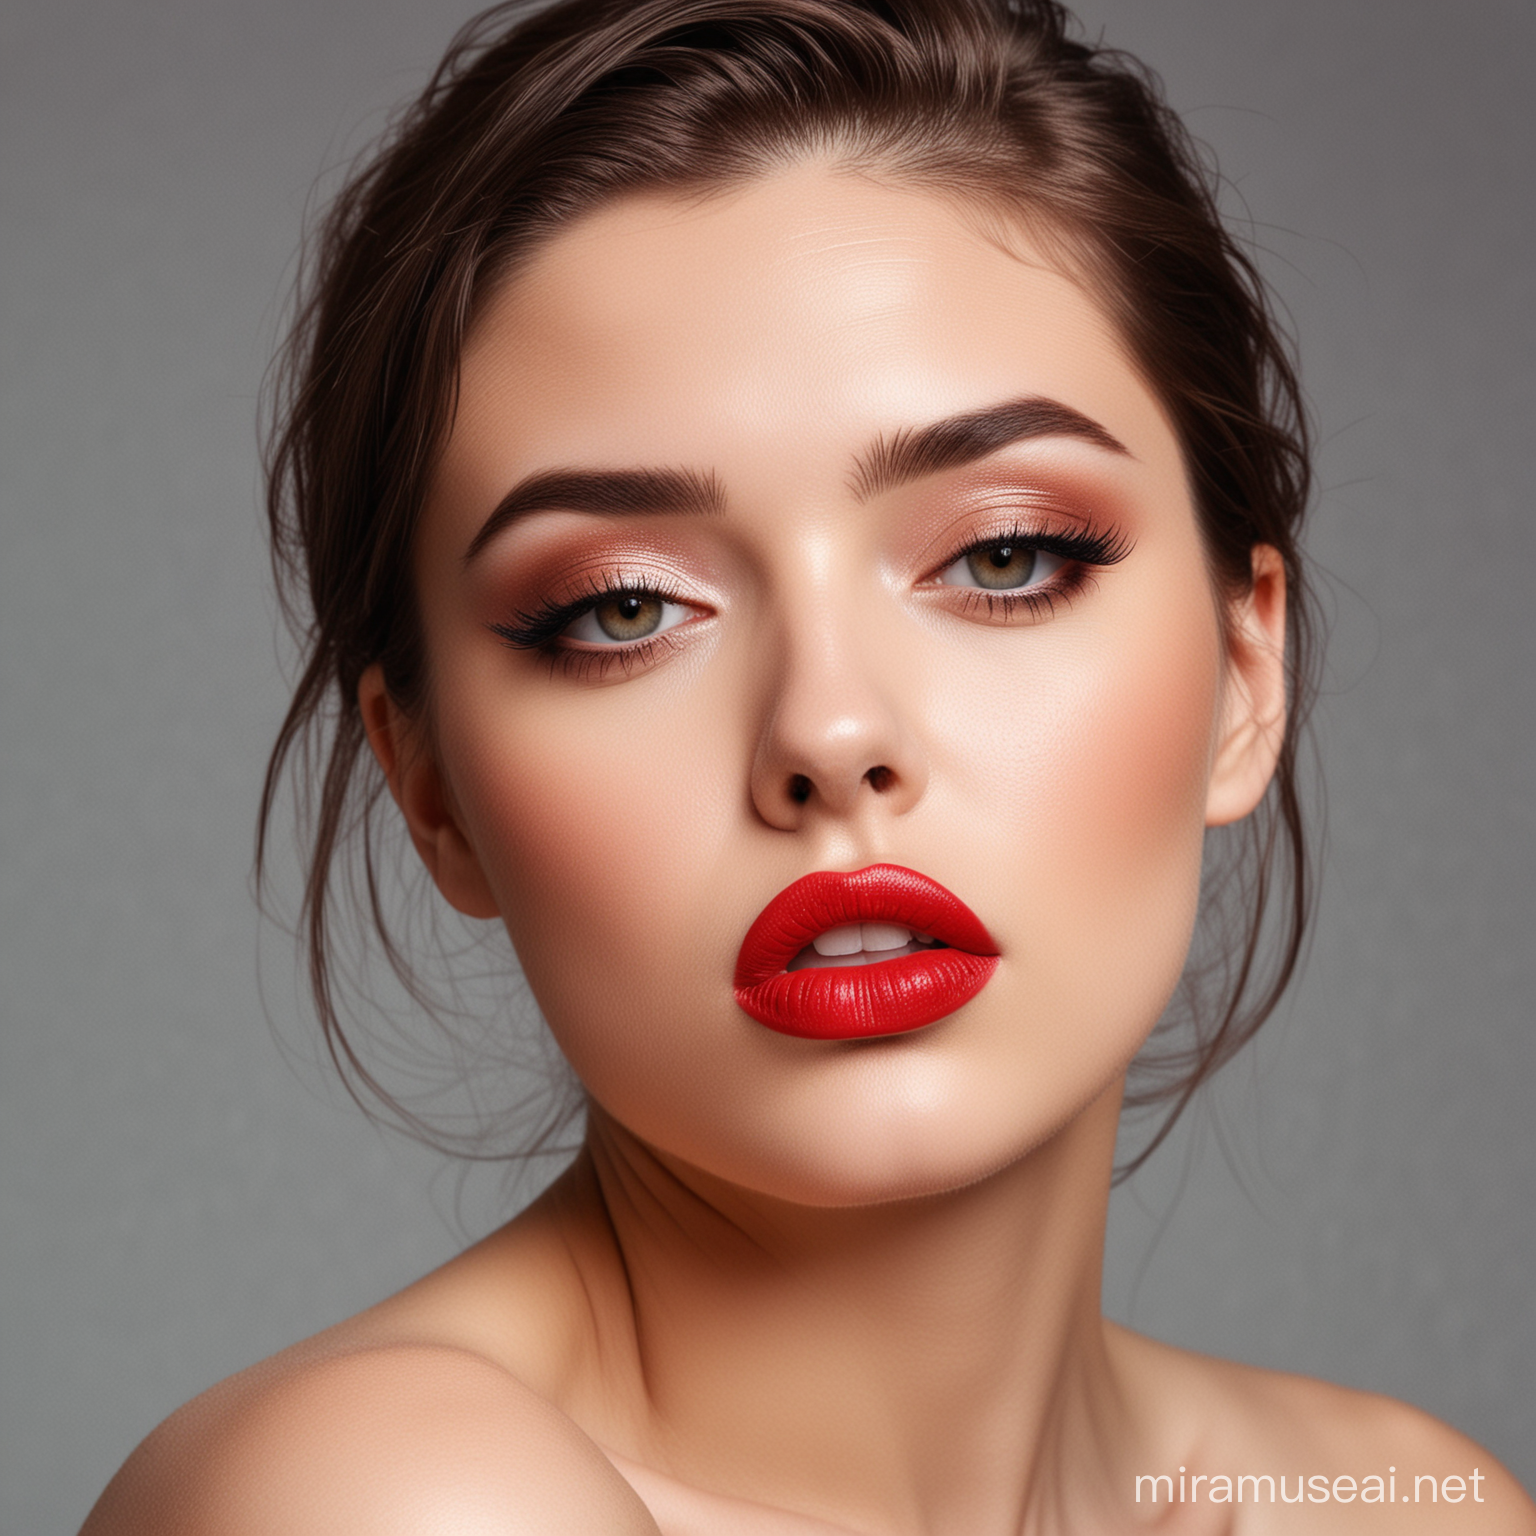 beautiful model, slightly open mouth, pouty red lips, outstanding makeup, looking over bare shoulder